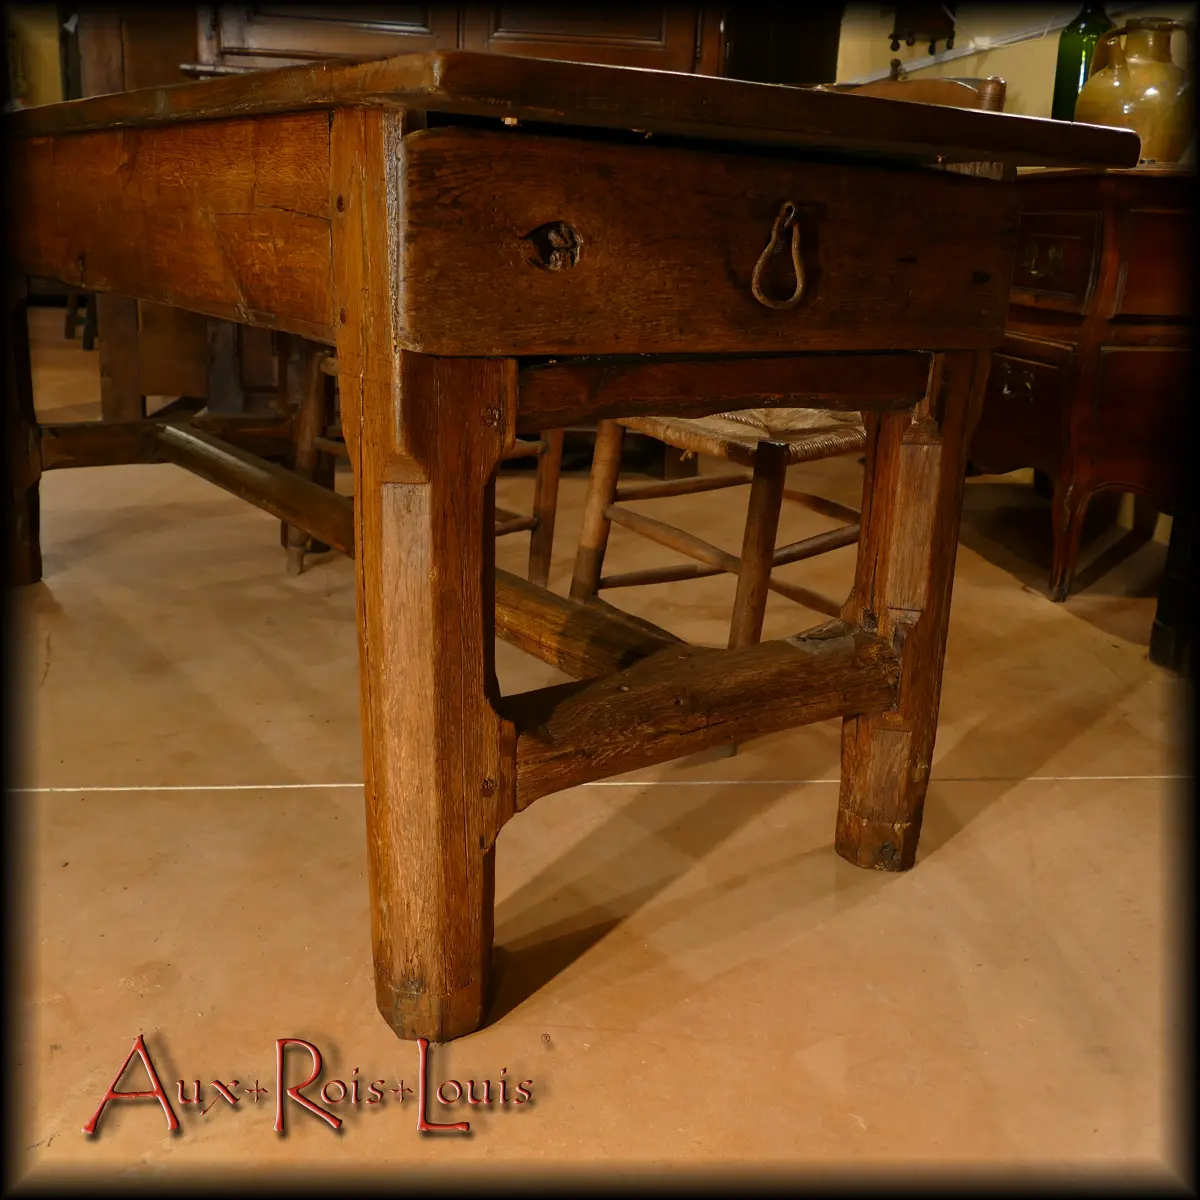 The other end of this Auvergne table, therefore located 1.86 meters further, also has a drawer which in the 18th century could hold kitchen utensils.